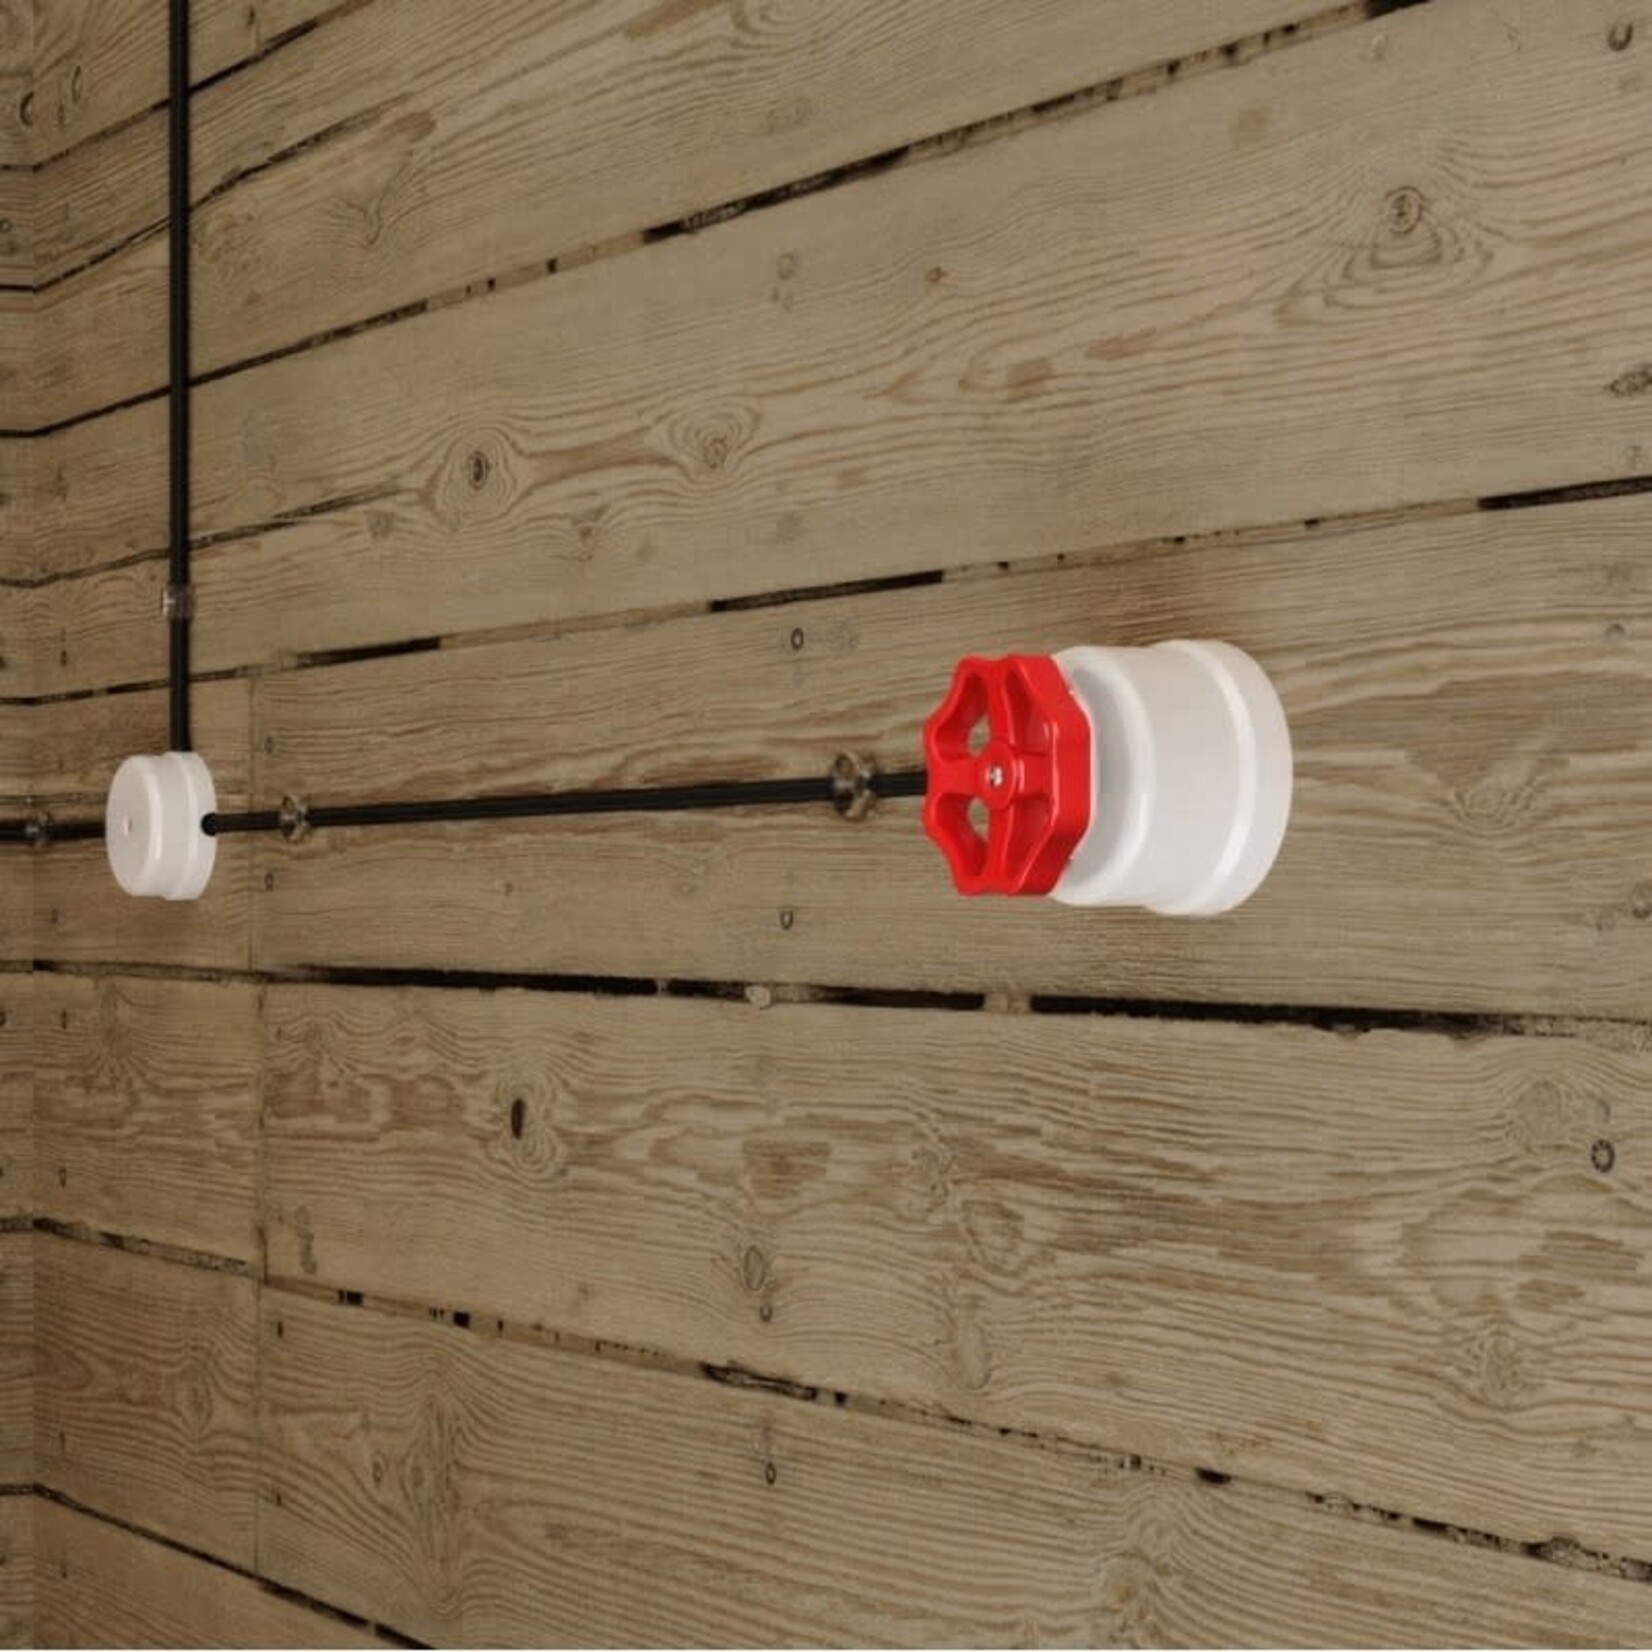 CCIT Switch/Diverter in white porcelain with RED knob